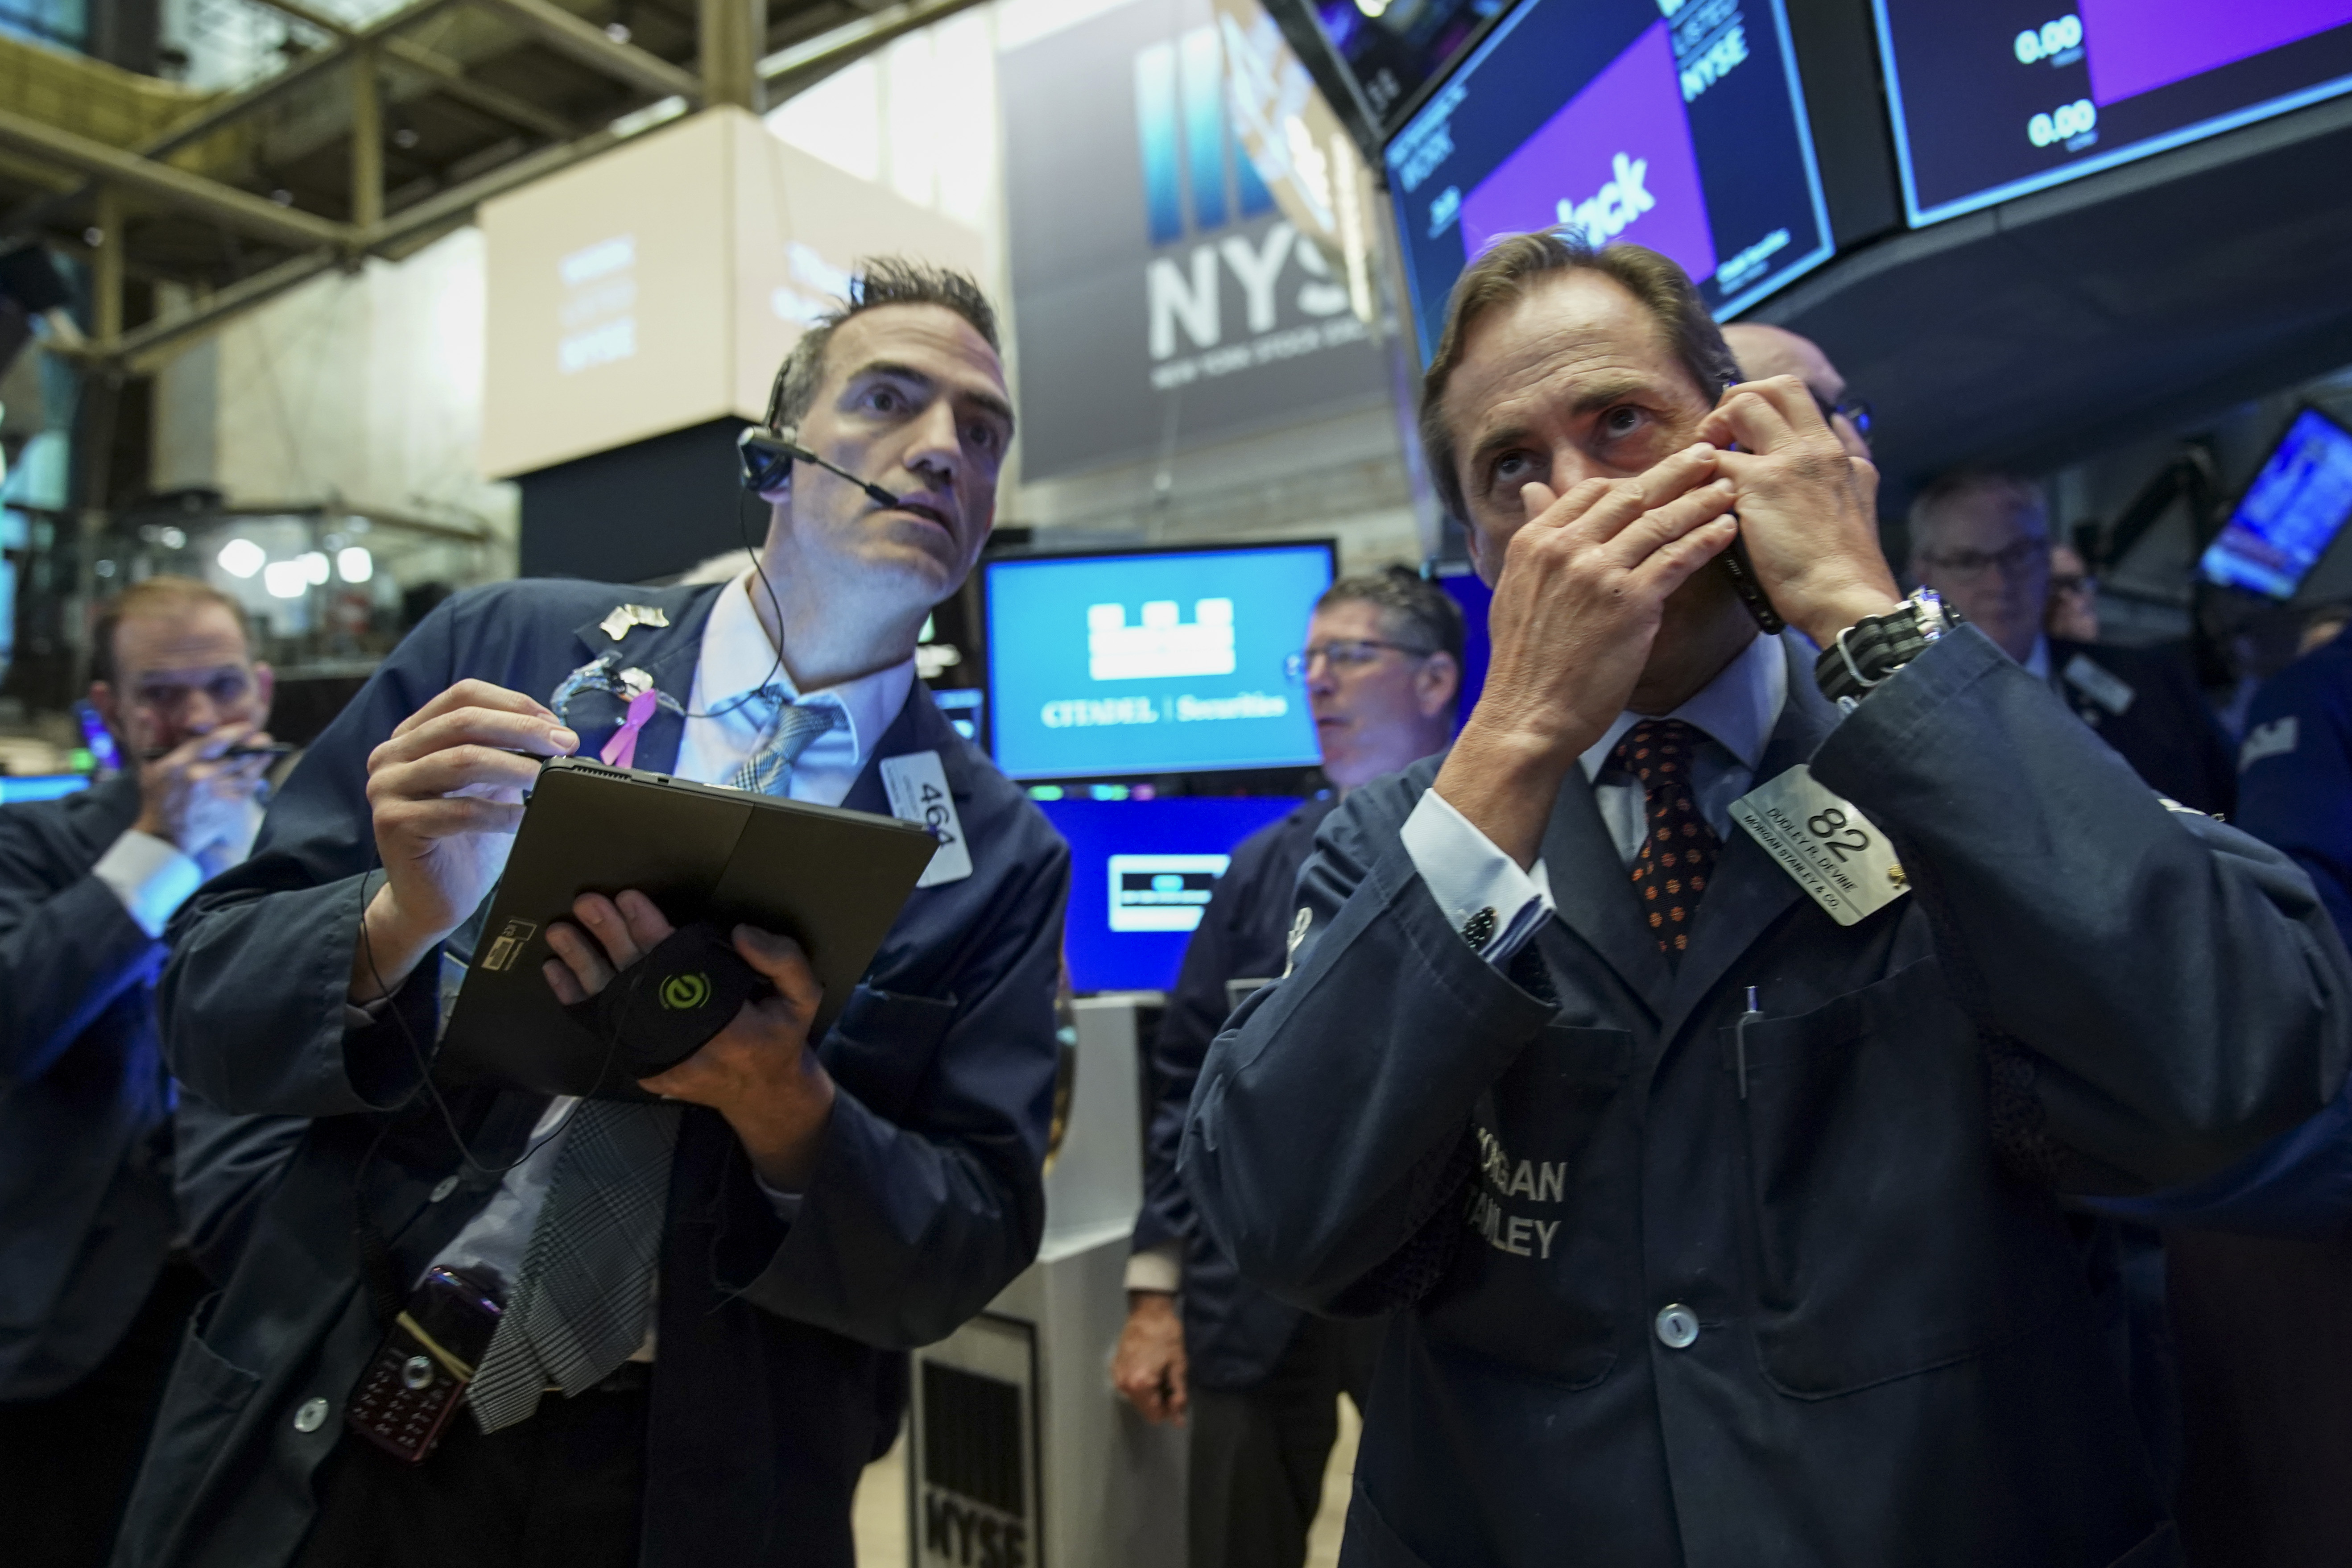 Stock market news live updates: Stocks tank, Treasury yields spike as jobs report dashes hopes of Fed pivot